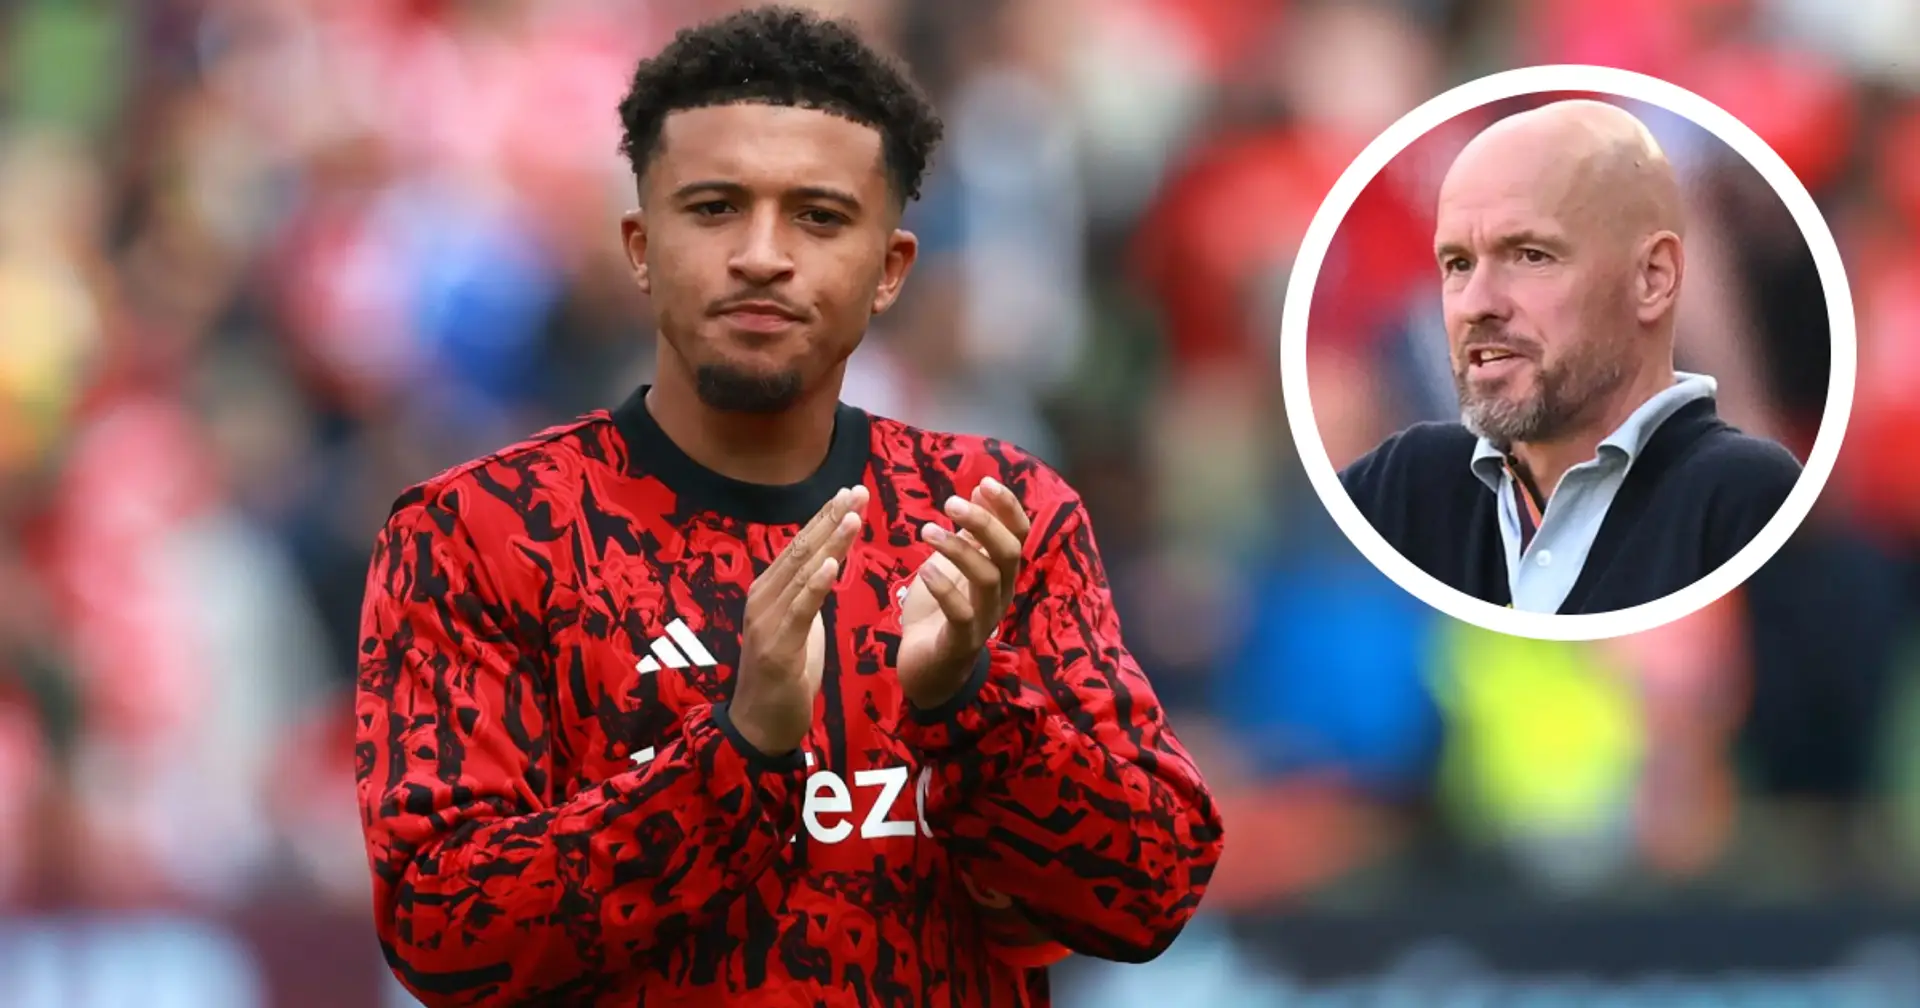 Revealed: How Erik ten Hag reacted to Sancho's social media outburst — he is not happy